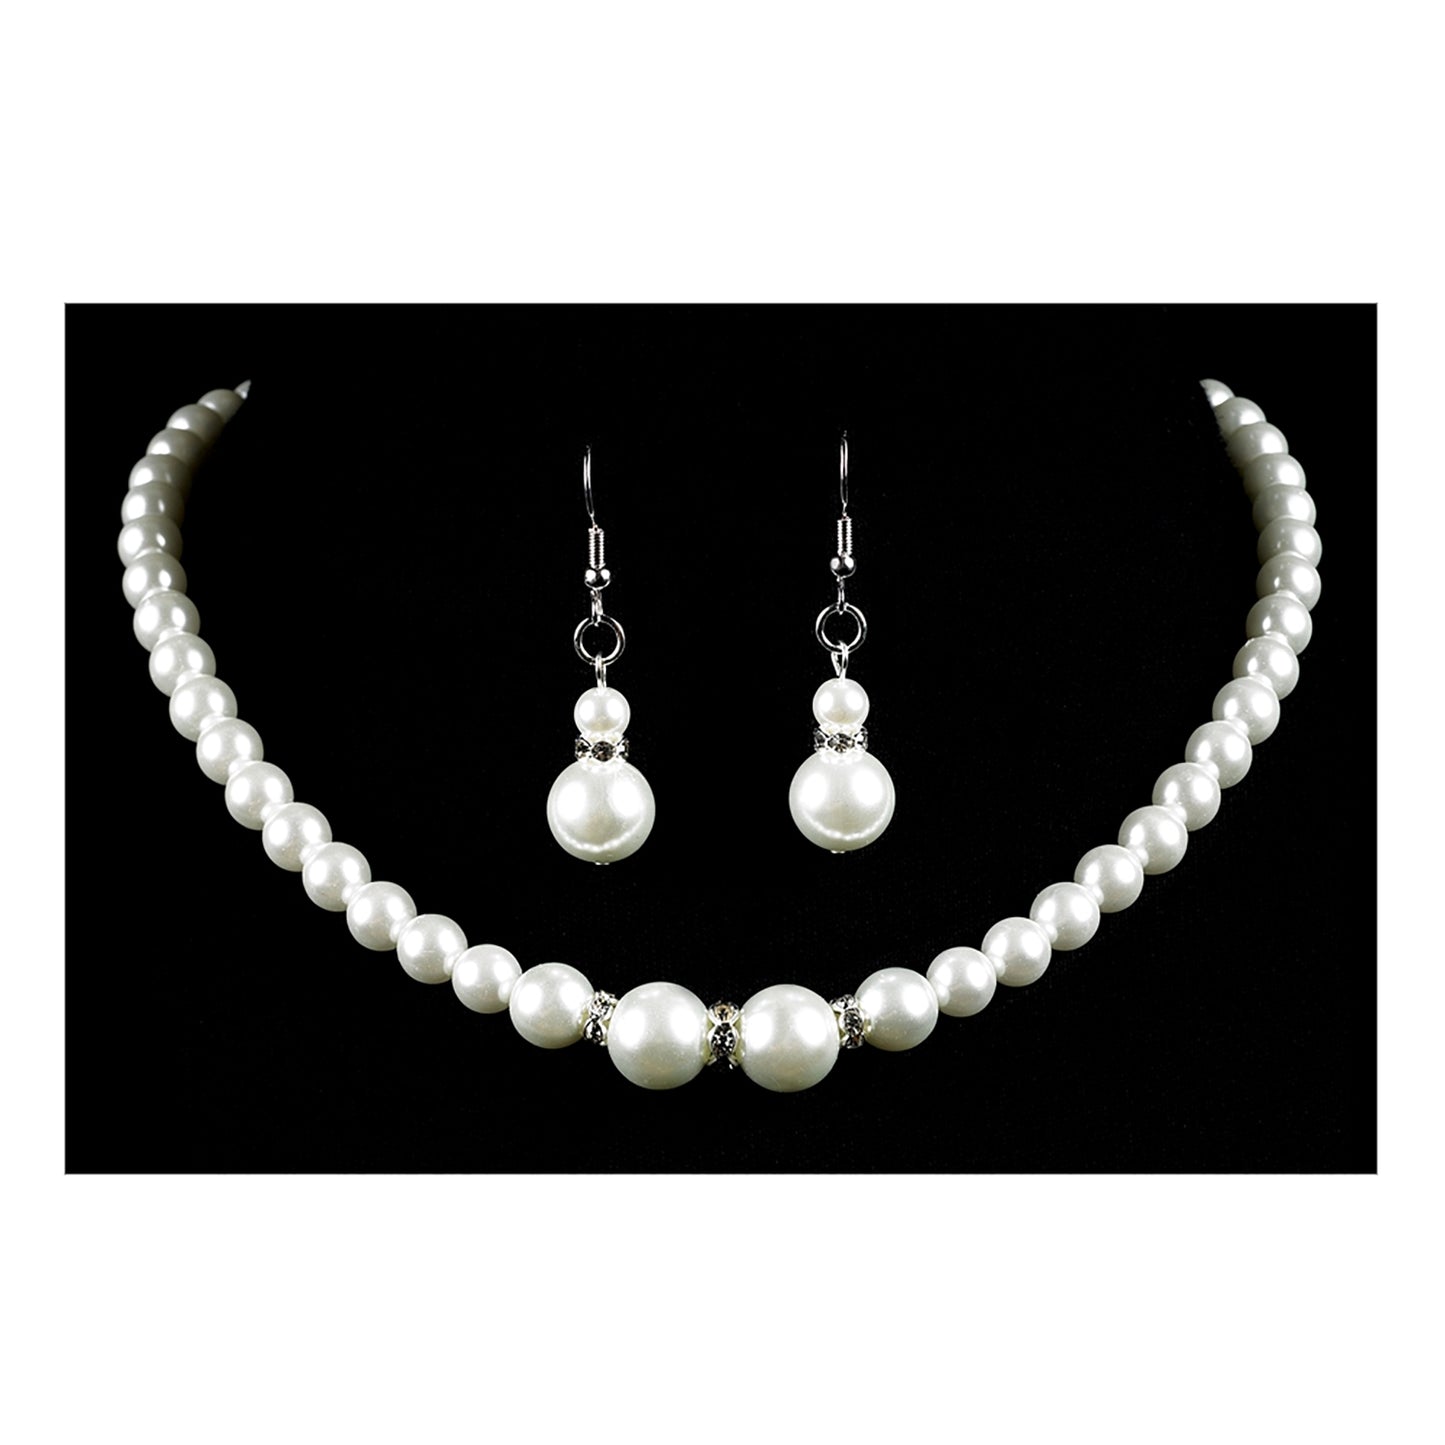 Strung Pearl & Rhinestone Necklace with Matching Drop Earrings Set